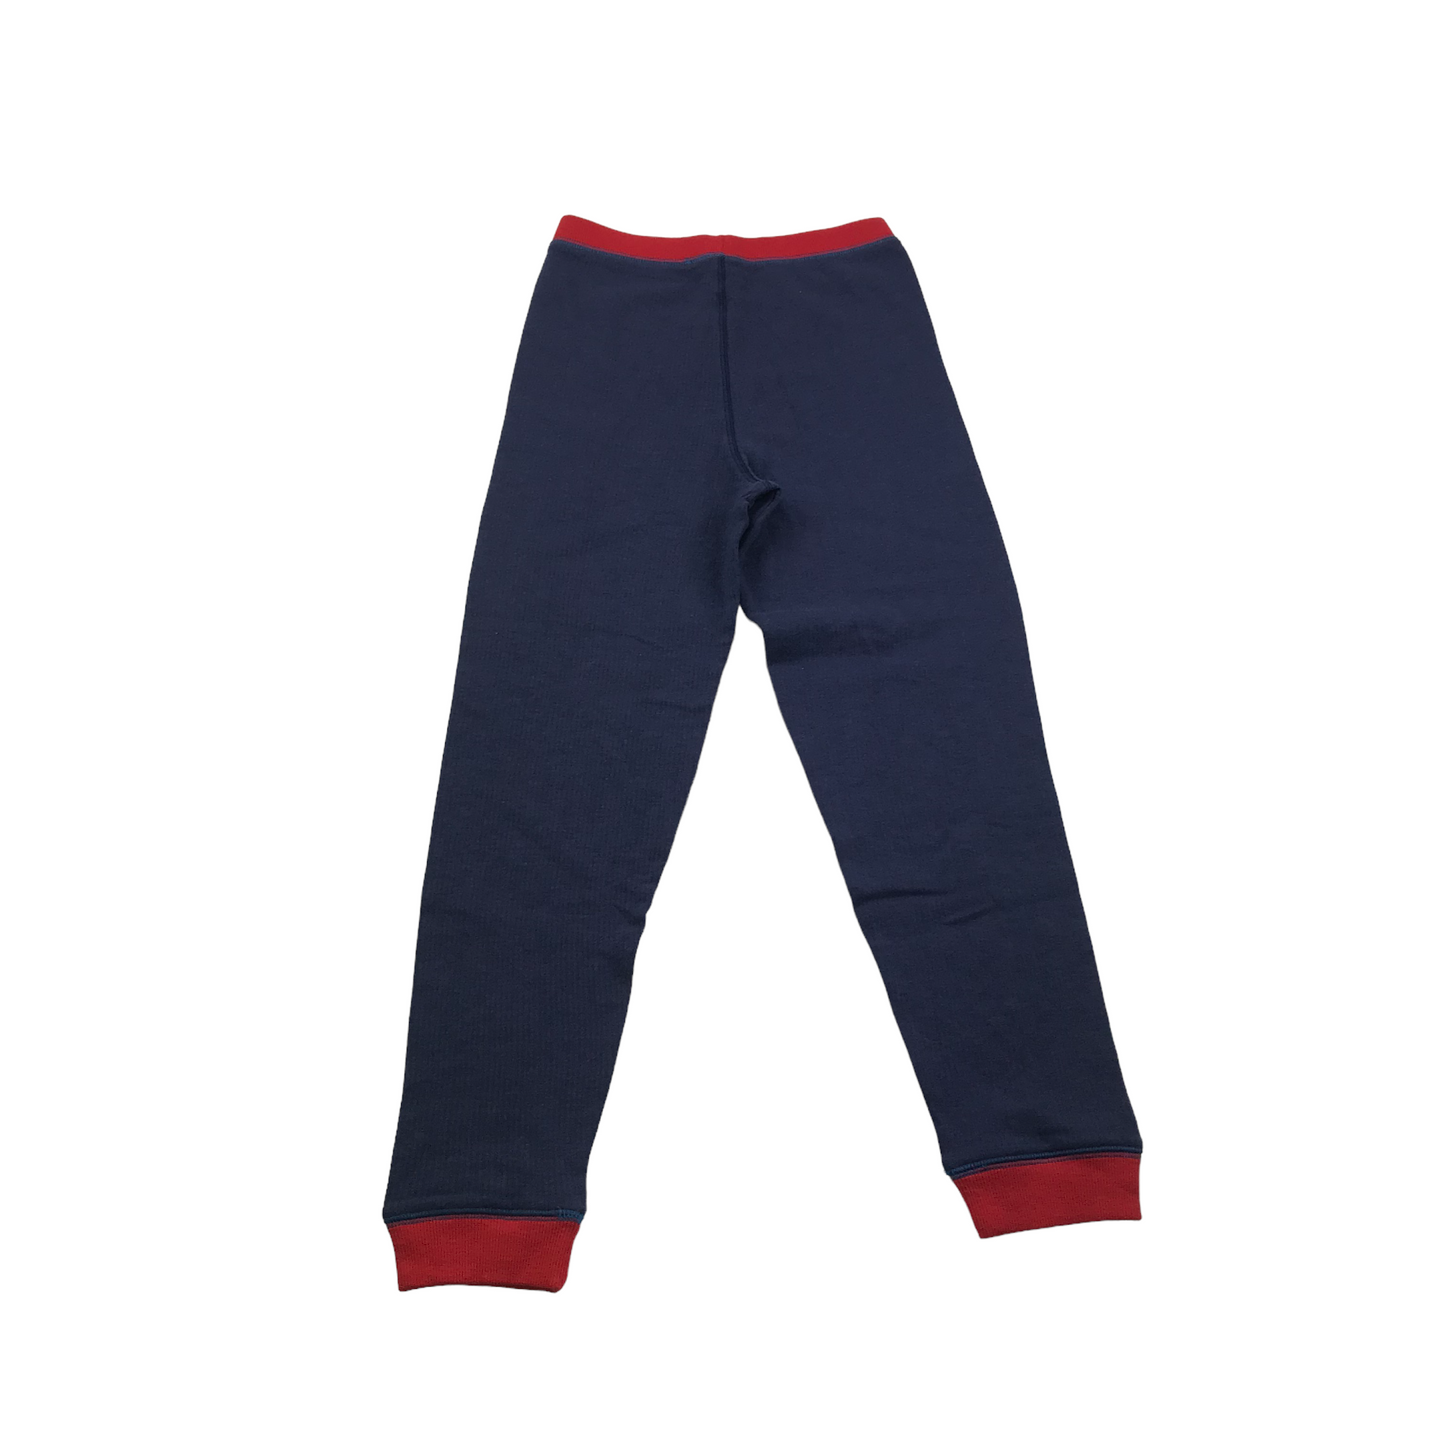 M&S Navy and Red Thermal Layer Leggings Age 9